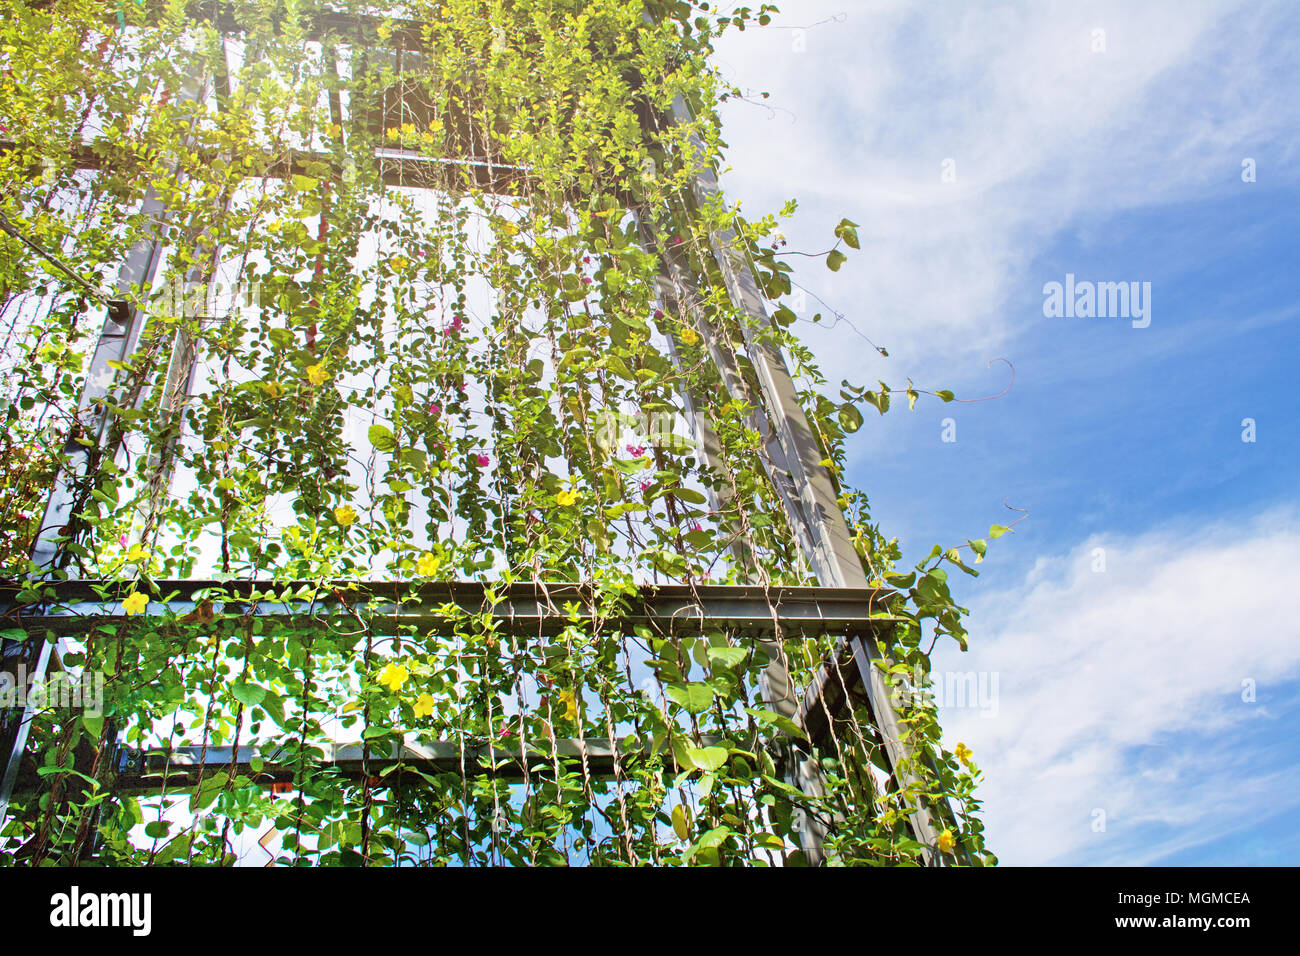 Stunning vertical garden with climbing vines on wires on the exterior of.a building structure Stock Photo